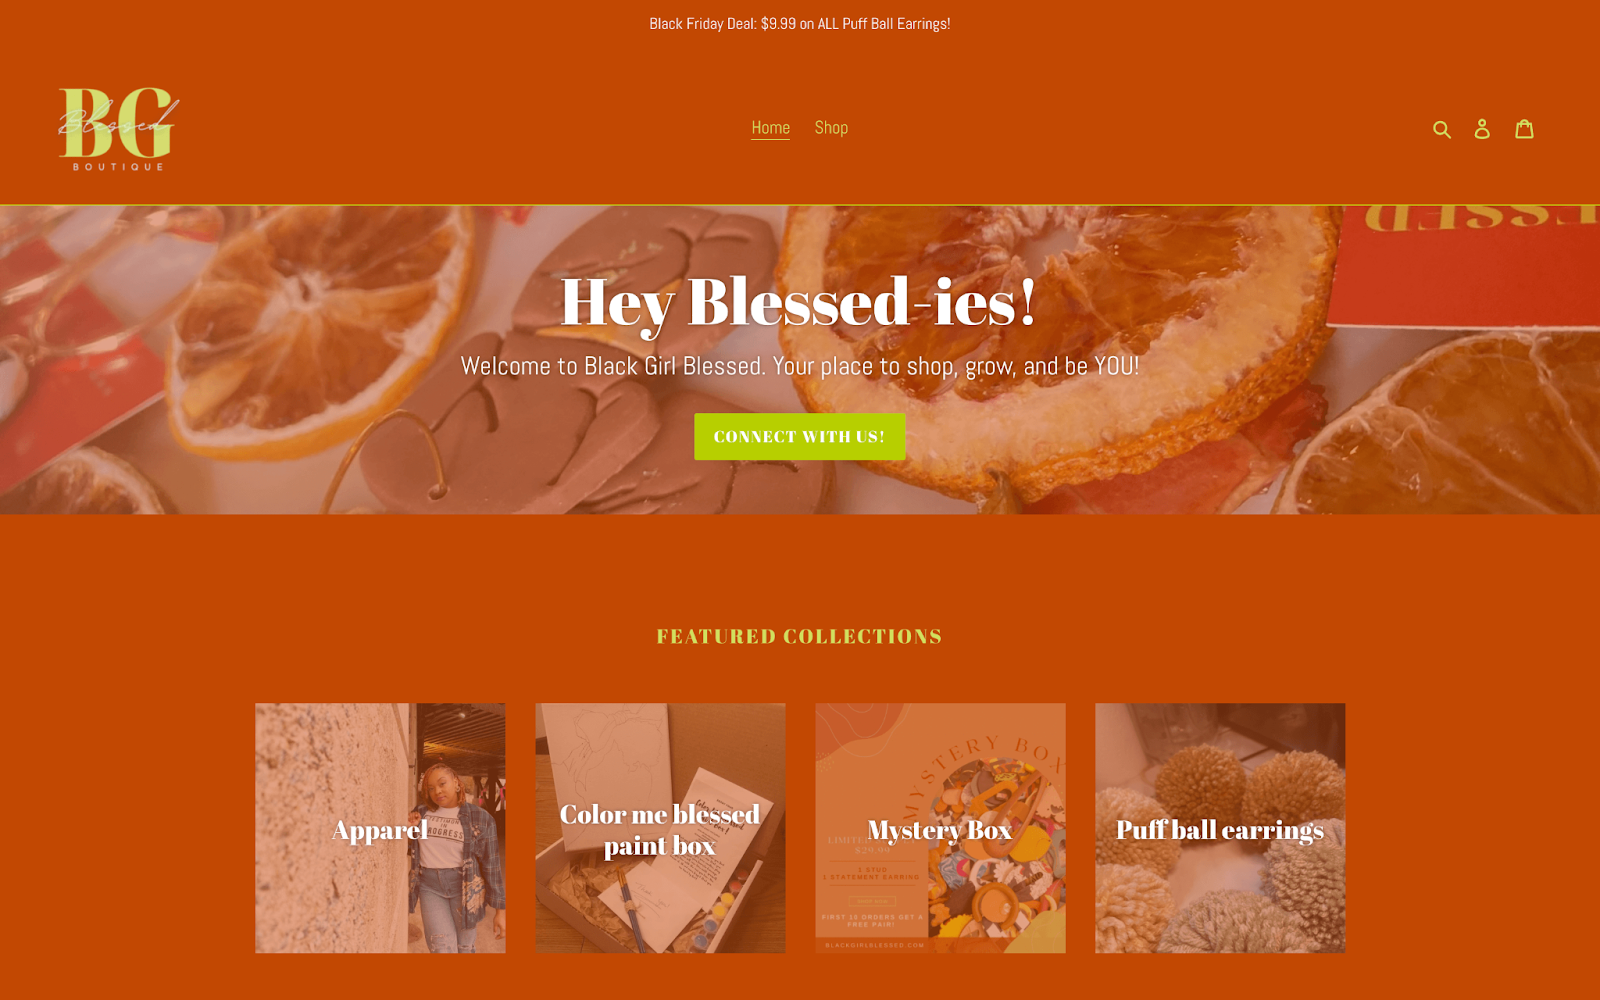 Support Black-owned businesses–A screenshot of Black Girl Blessed’s homepage with a header reading “Hey Blessed-ies!” and photos of their featured collections” Apparel, Color me blessed paint box, Mystery Box, and Puff ball earrings. 